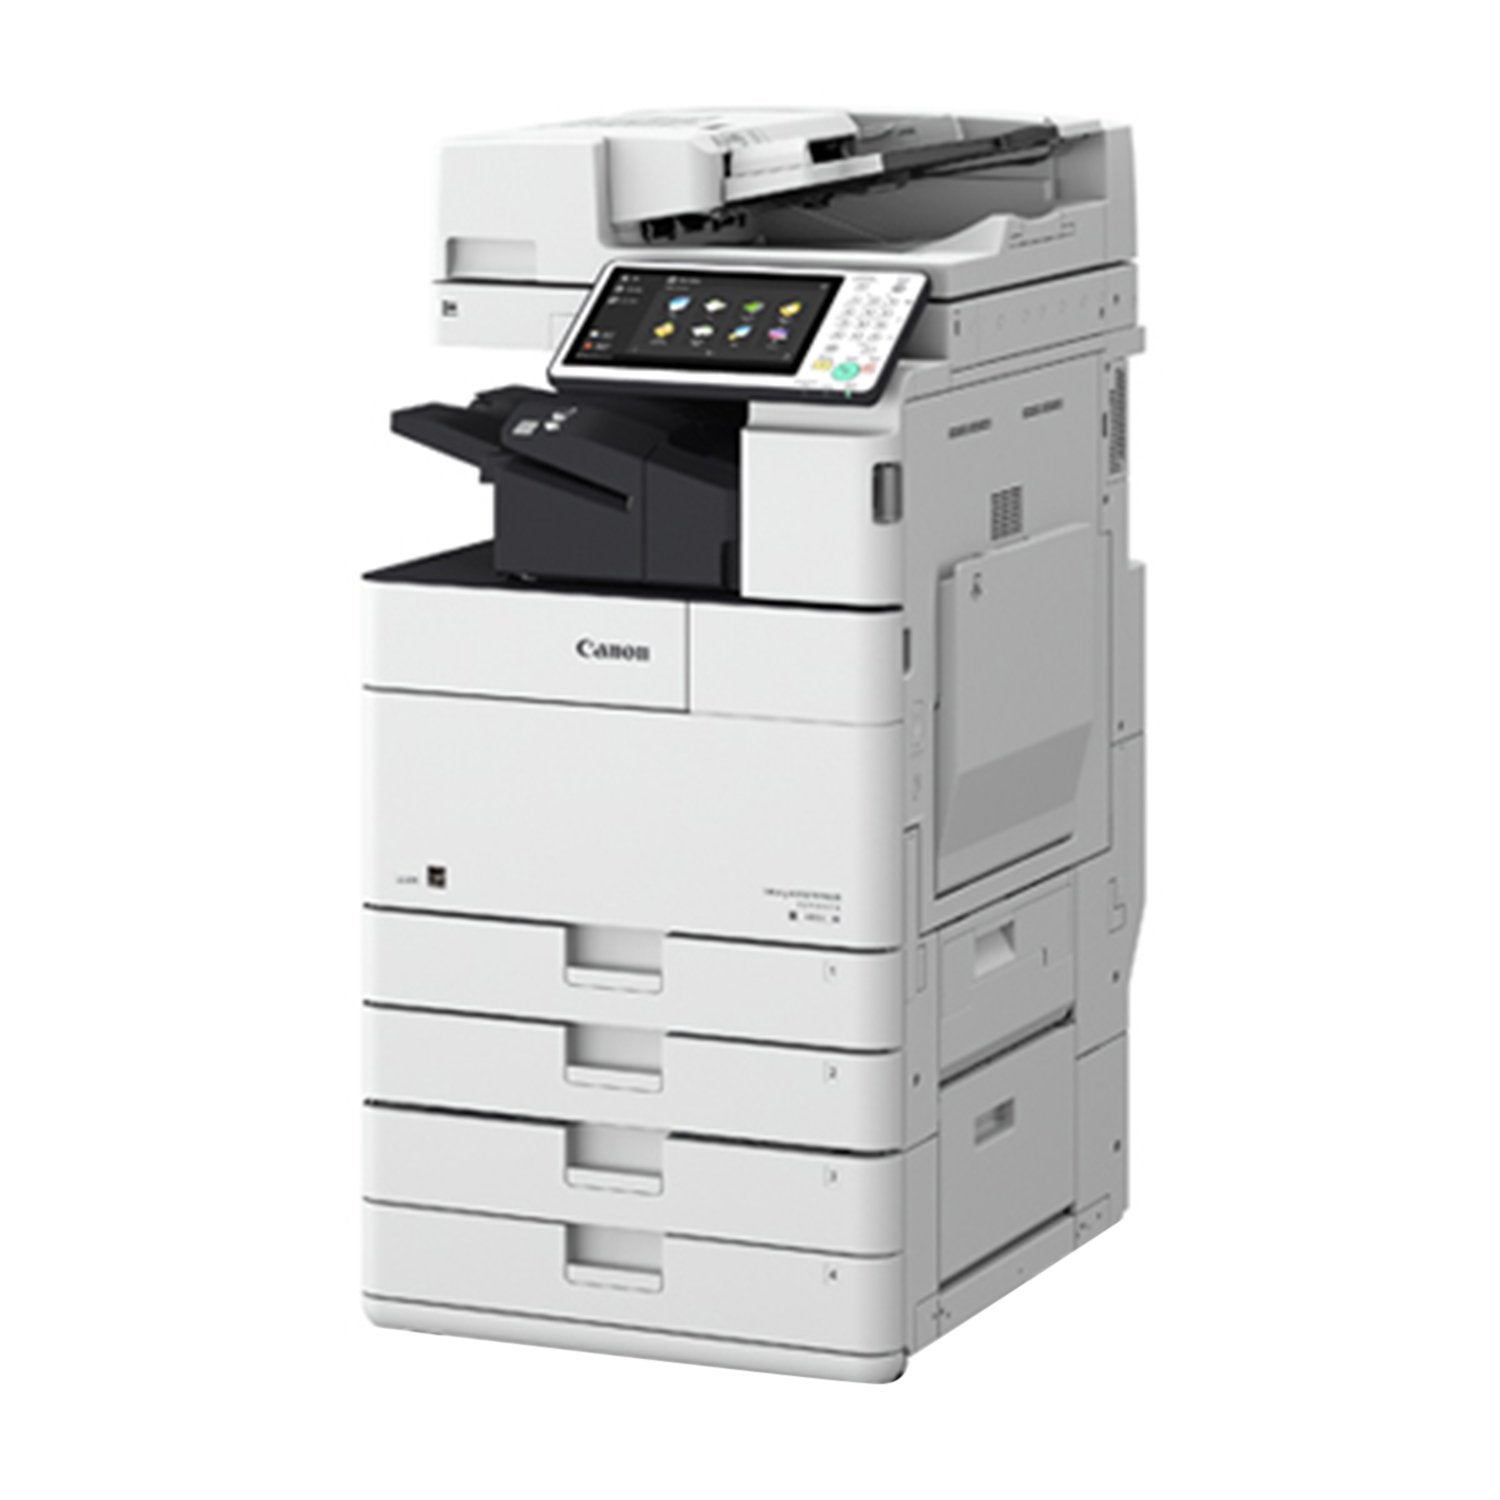 Absolute Toner Canon imageRUNNER ADVANCE 4551i Laser Multifunction Printer Copier For Office | IRA4551i Showroom Monochrome Copiers